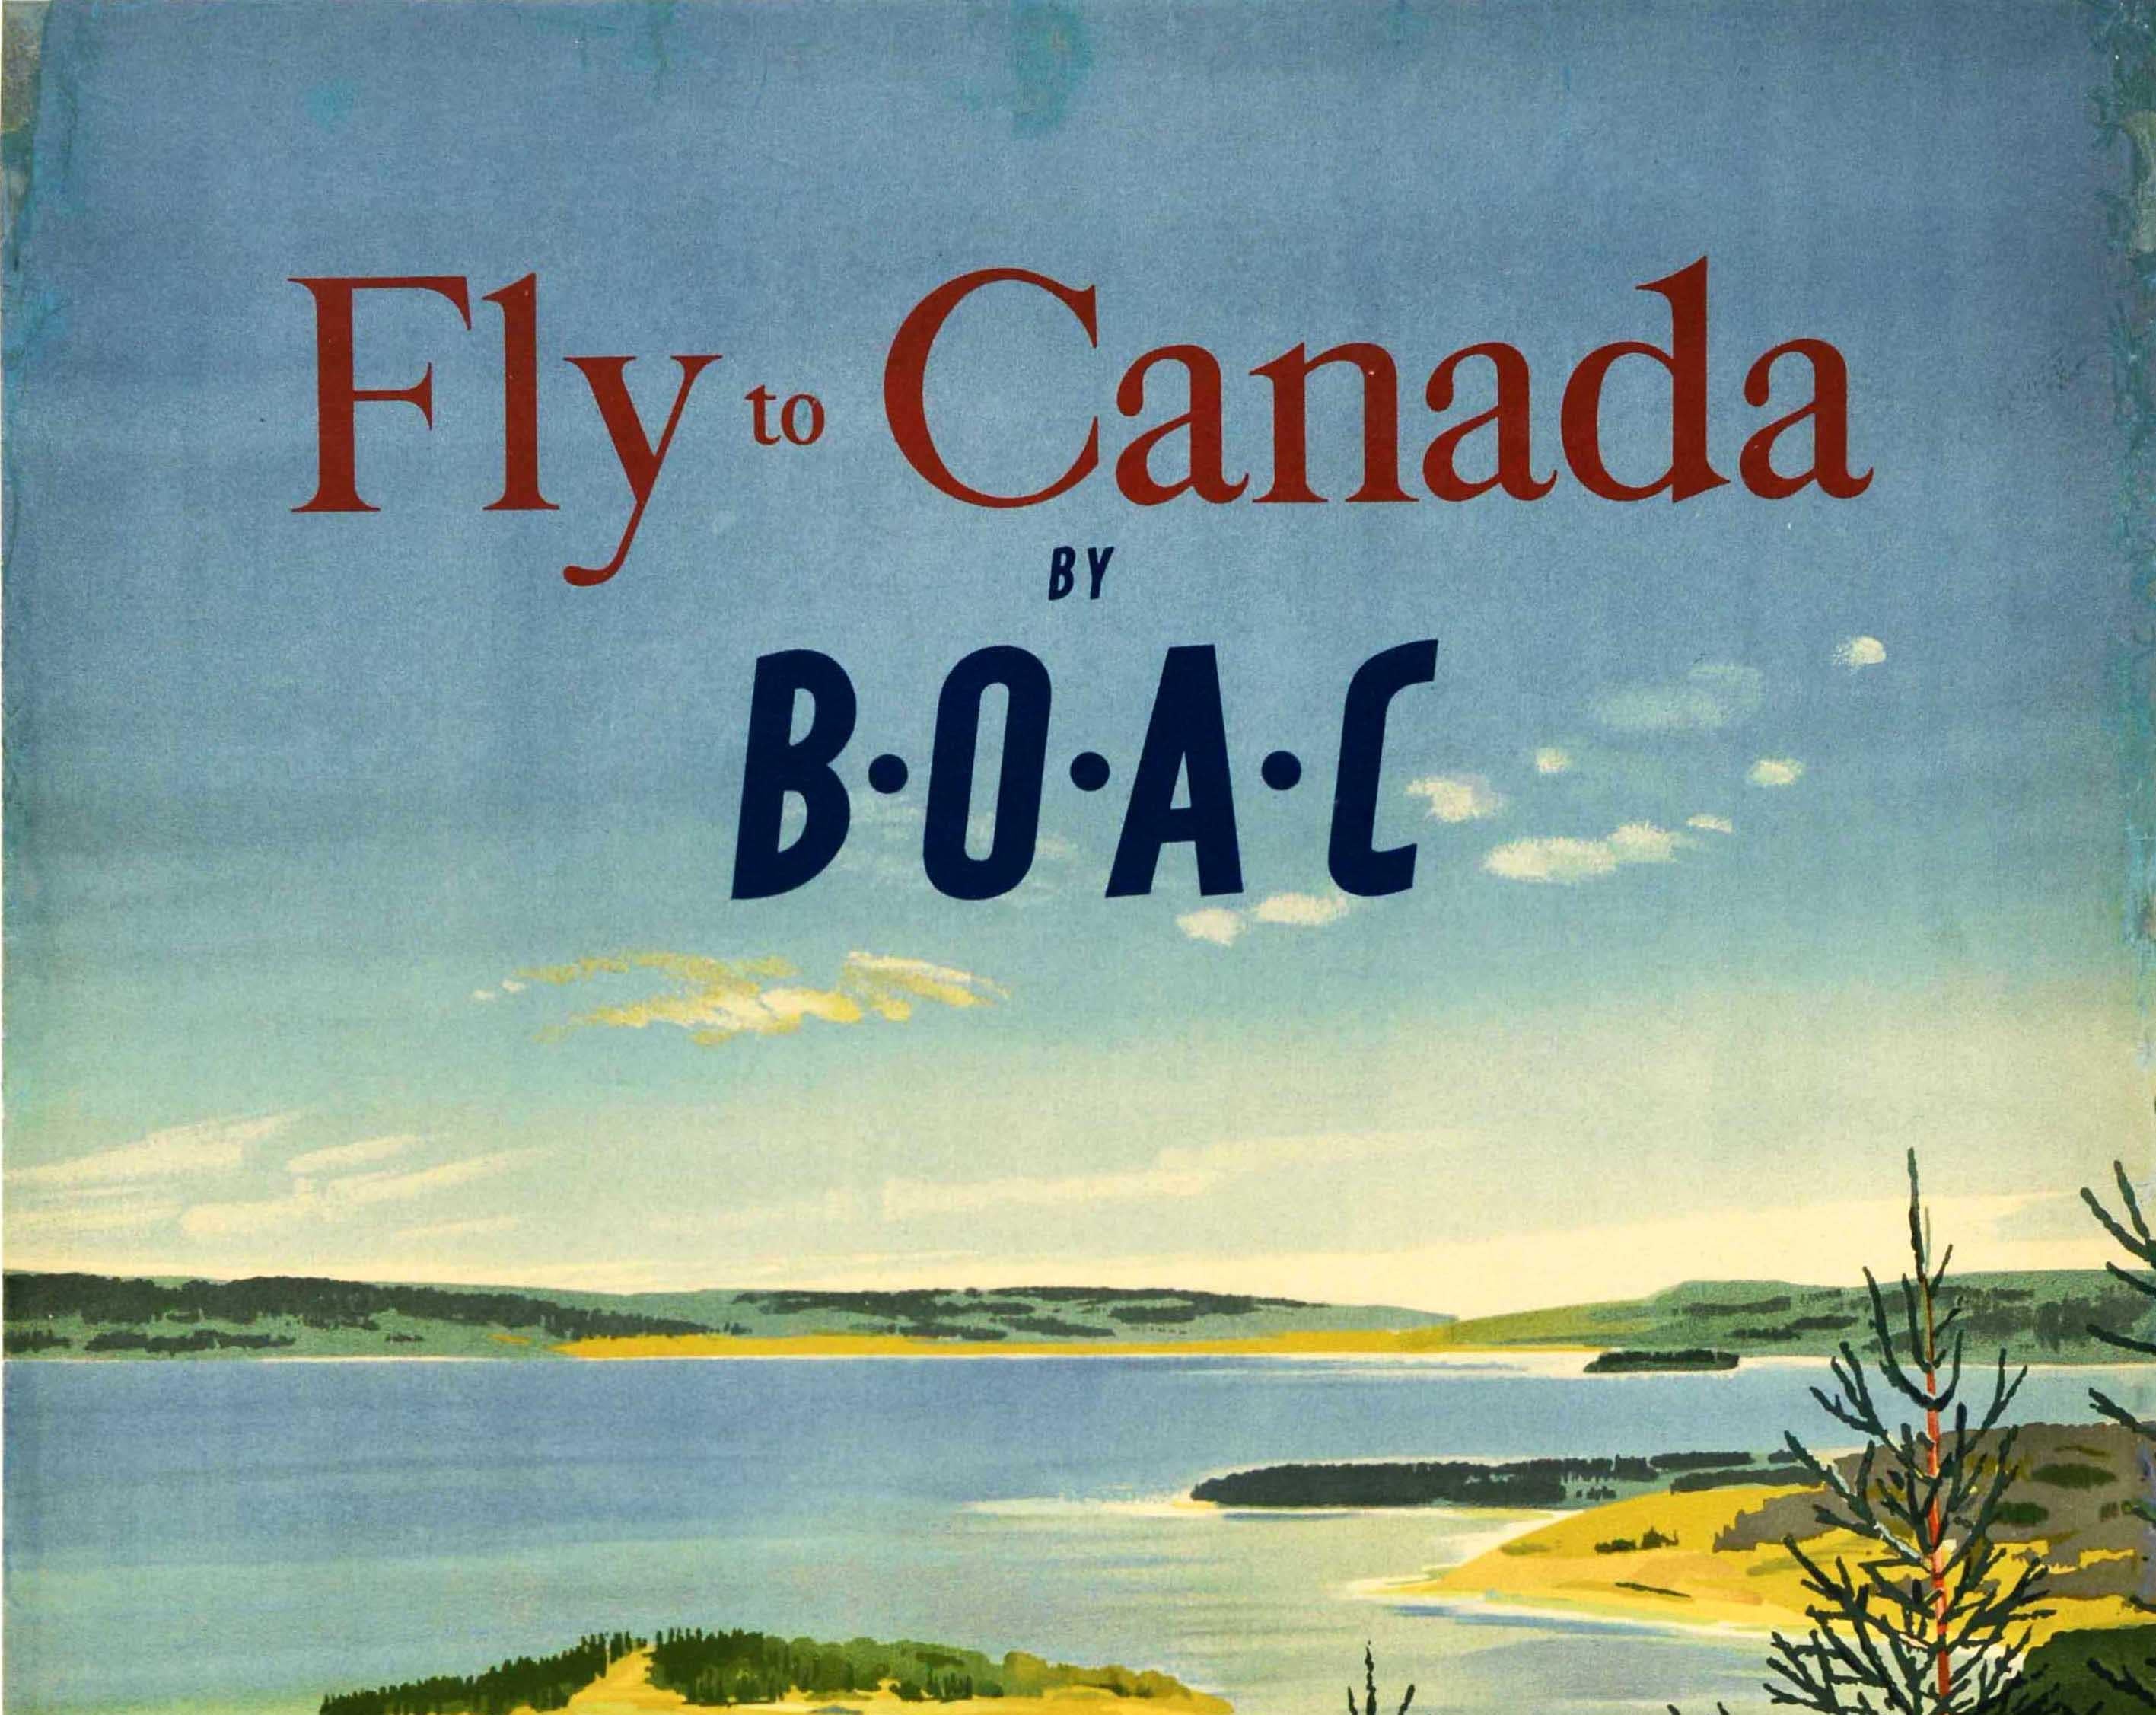 Original vintage travel poster - Fly to Canada by BOAC - featuring scenic artwork by Paul Chater (1879-1949) depicting a boat on calm blue water with an island and hills on the horizon, a sandy beach and cliff by the jetty with people walking and a